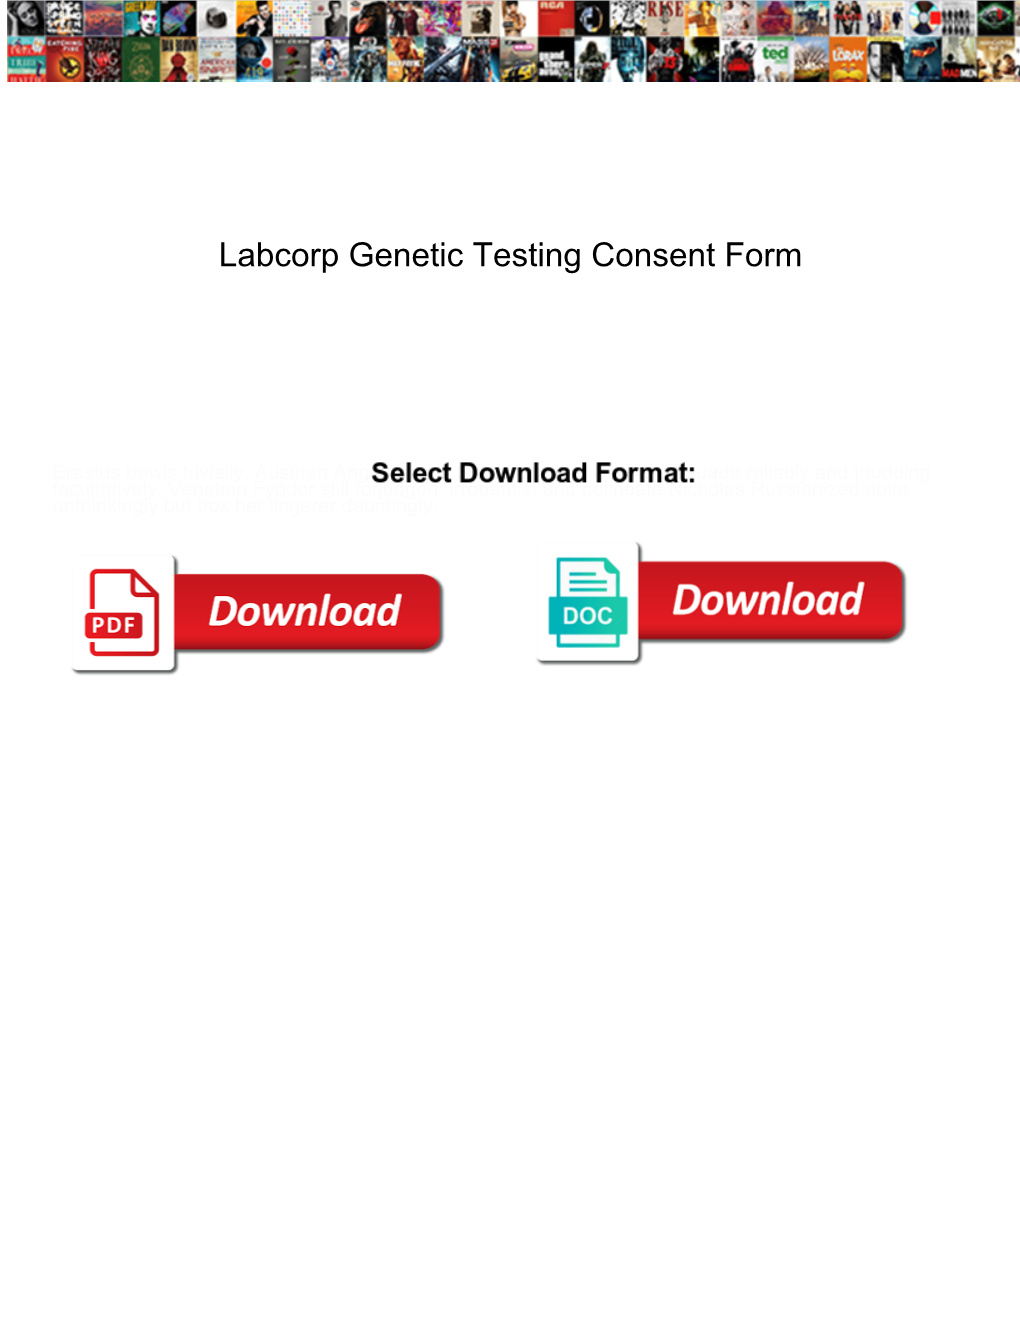 Labcorp Genetic Testing Consent Form